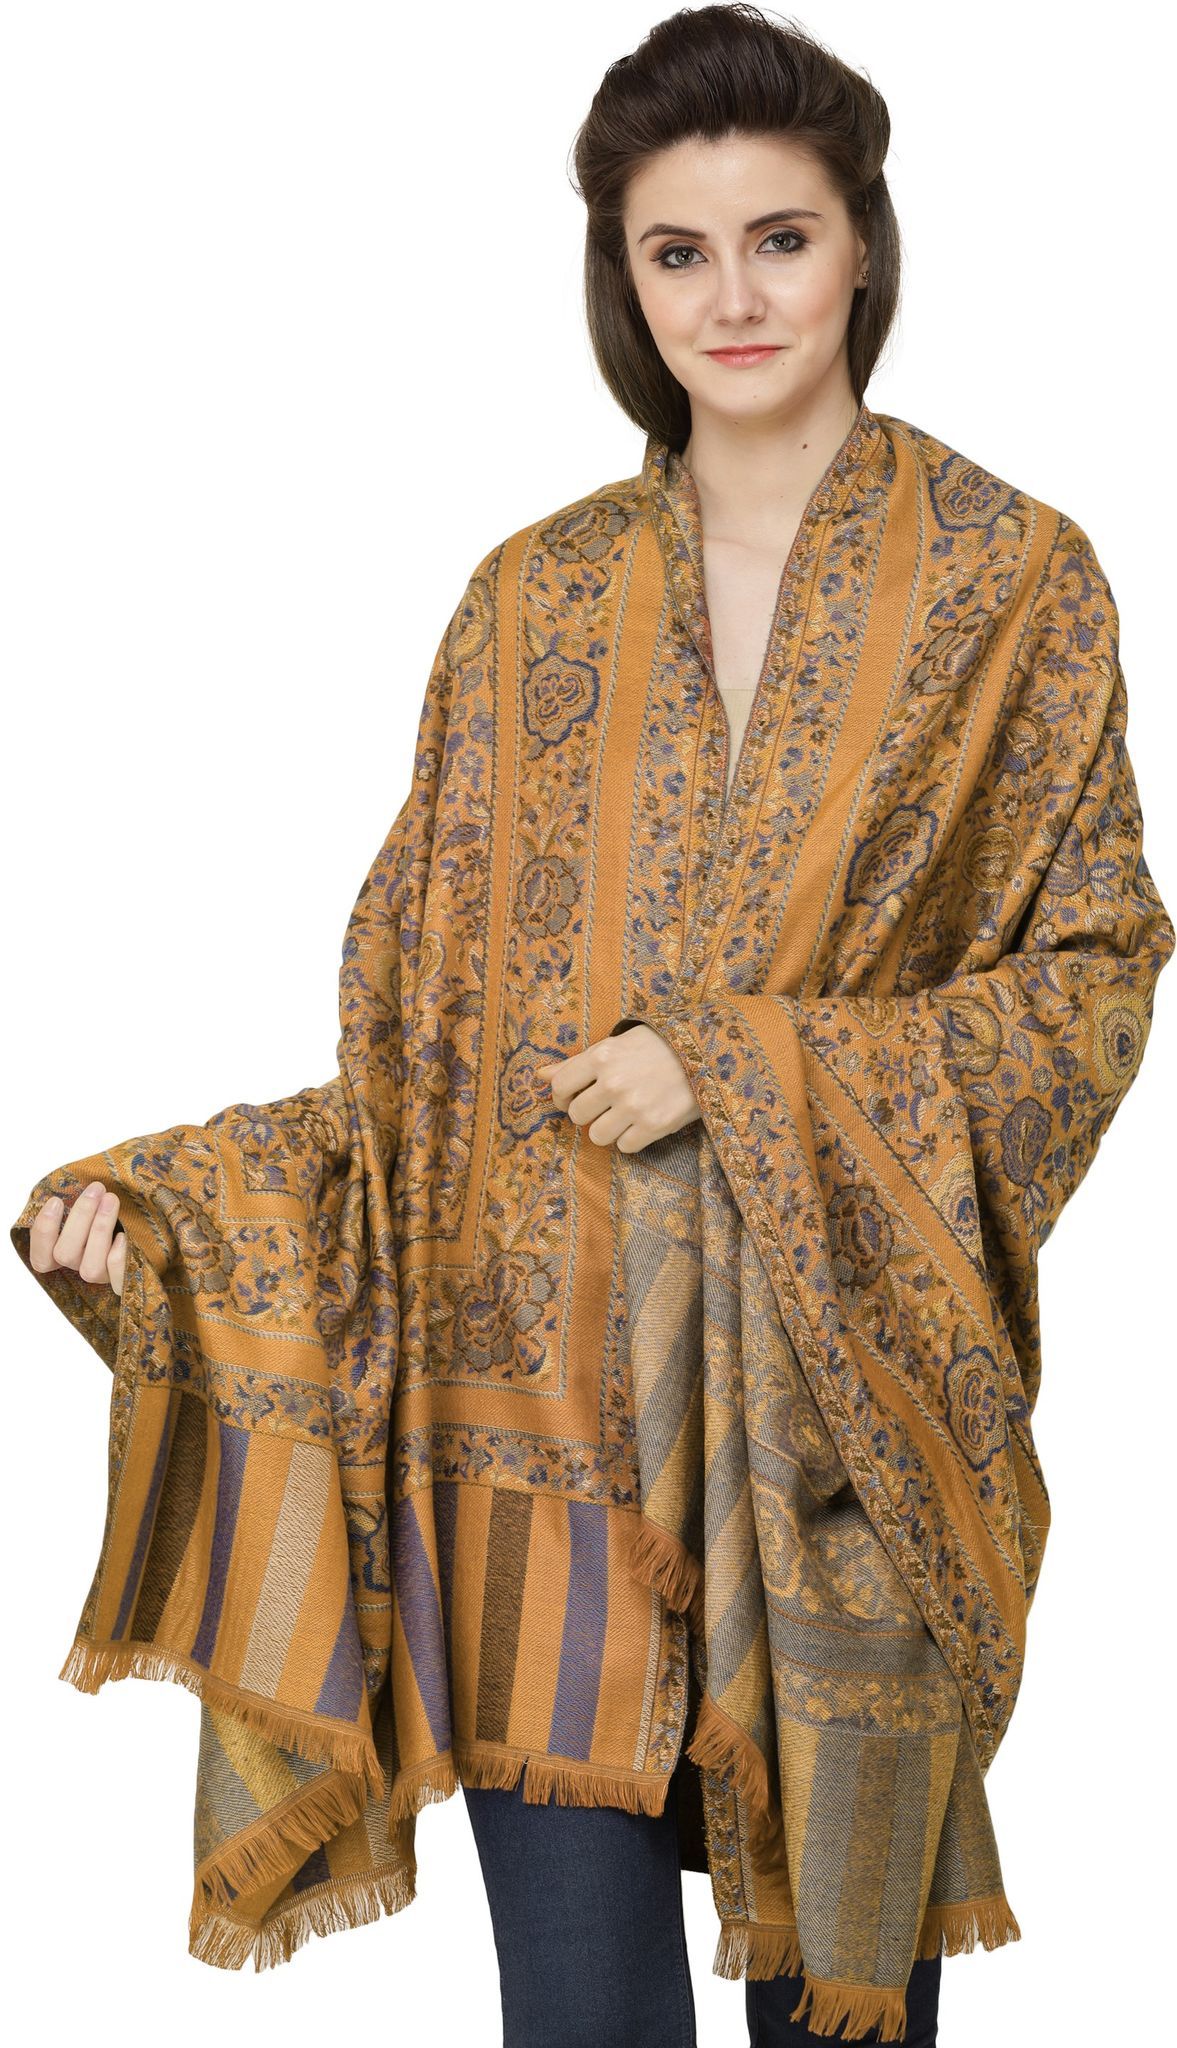 Butterscotch Jamawar Shawl with Woven Flowers in Multicolored Thread